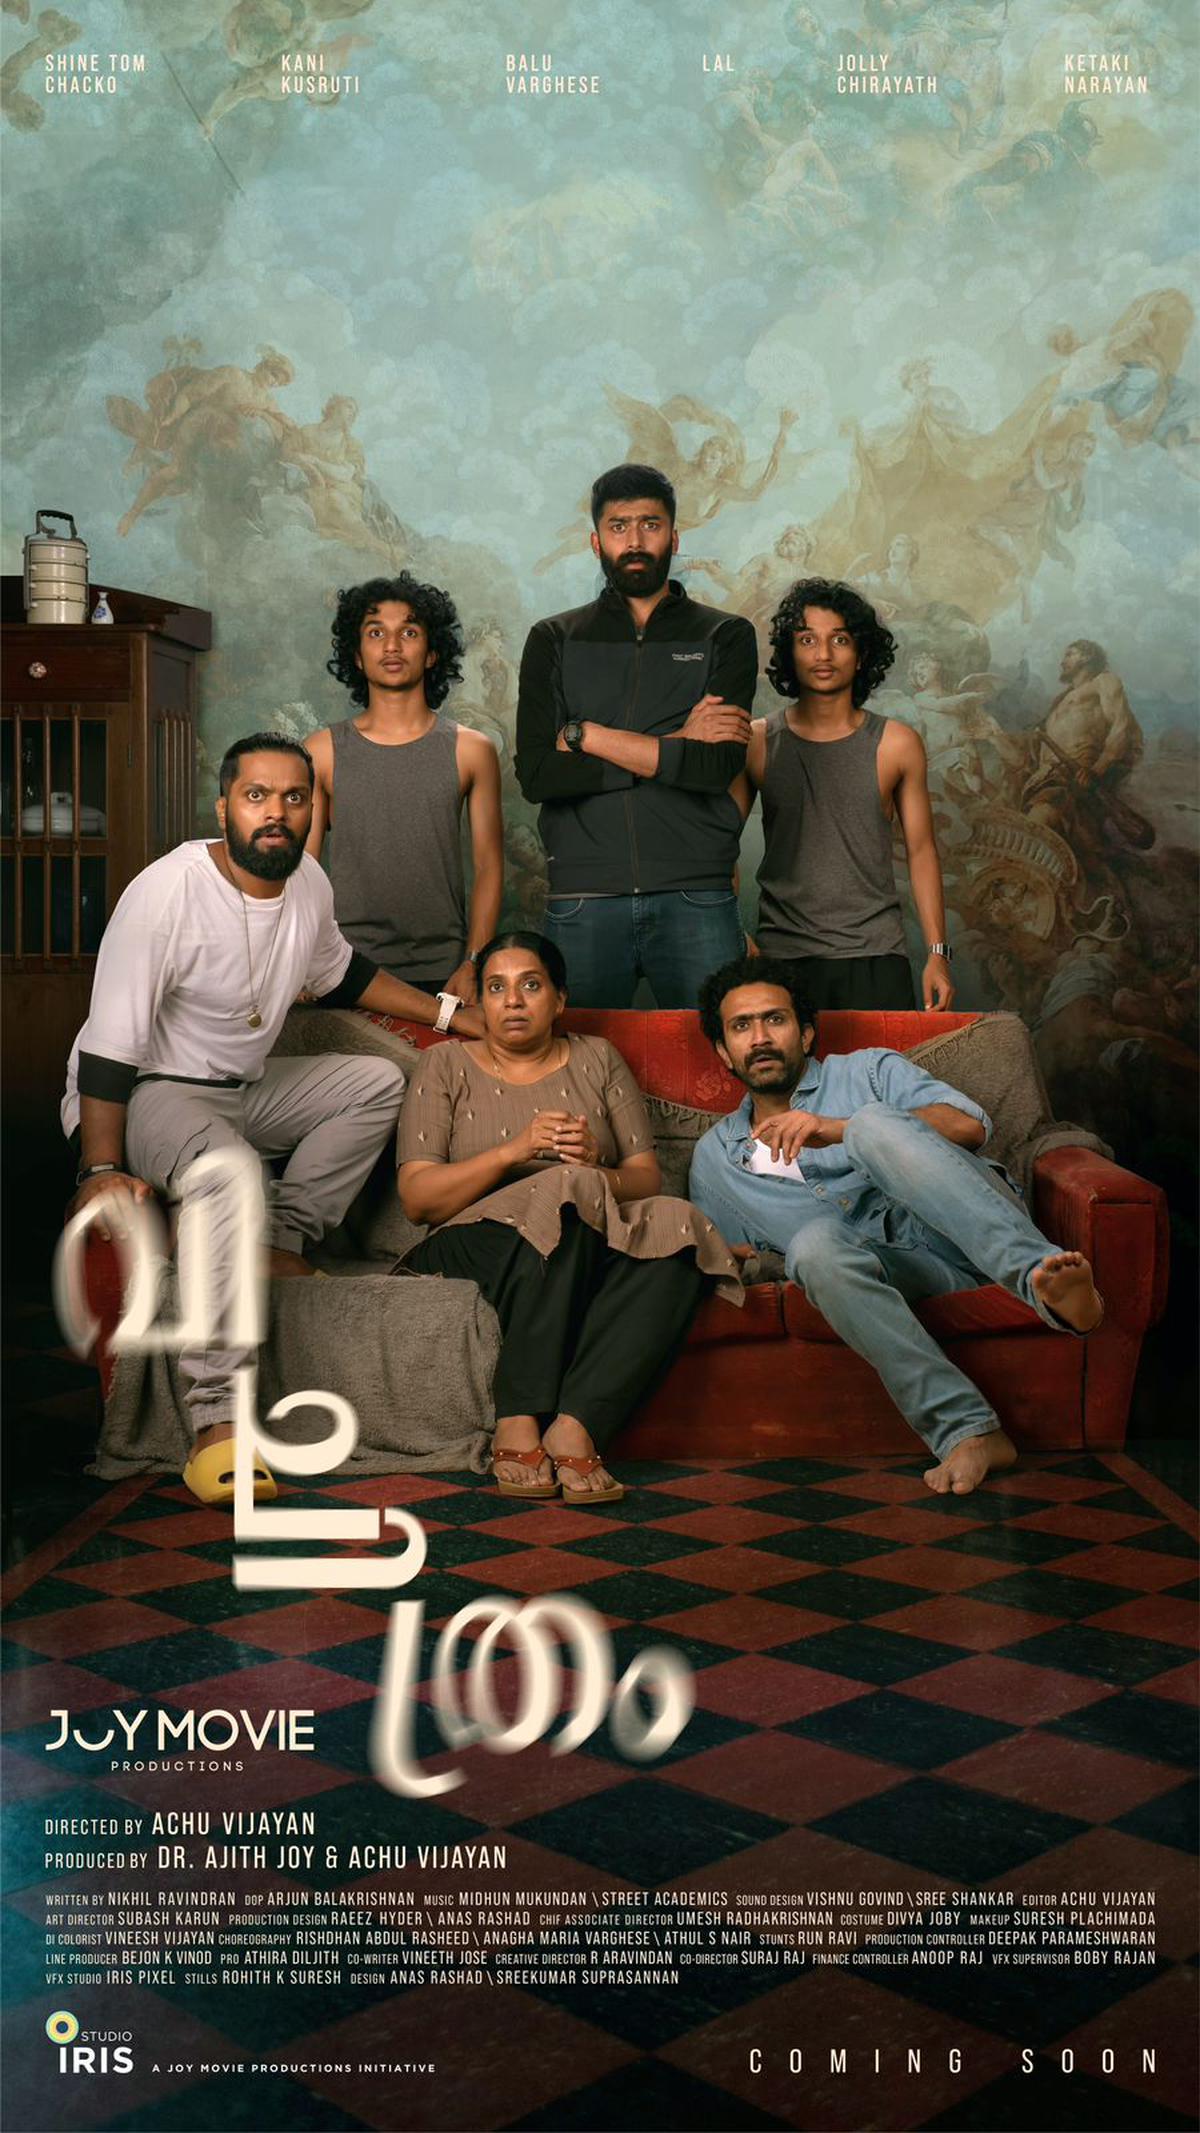 Malayalam film ‘Vichitram’ is a blend of mystery and comedy, says its